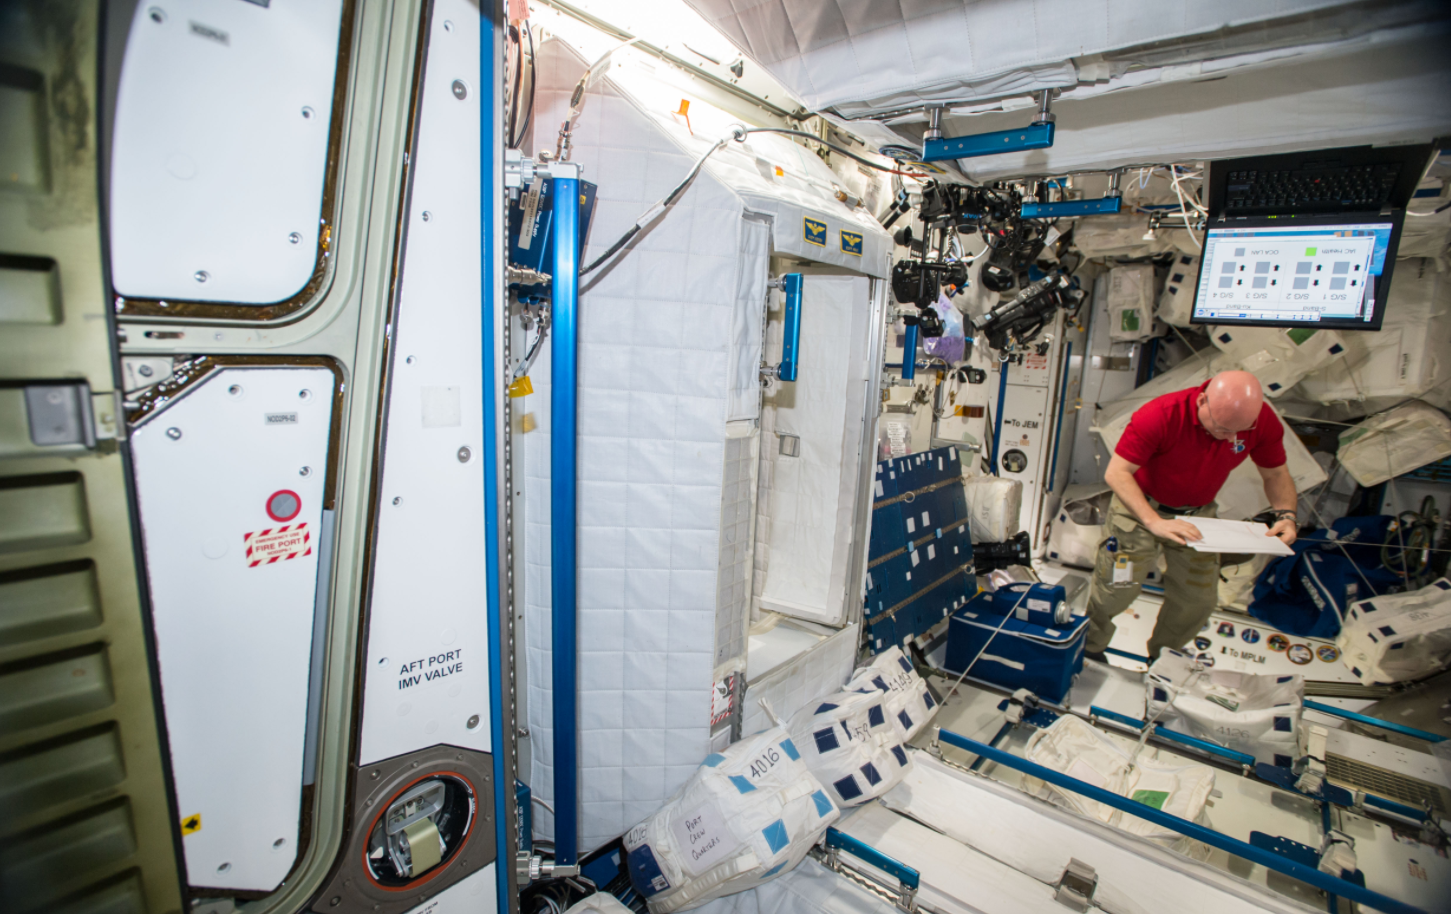 NASA astronaut Scott Kelly is shown during the collection of surface and air samples using various devices in multiple locations to characterize the types of microbial populations on the space station for the Microbial Observatory-1 payload. Credits: NASA